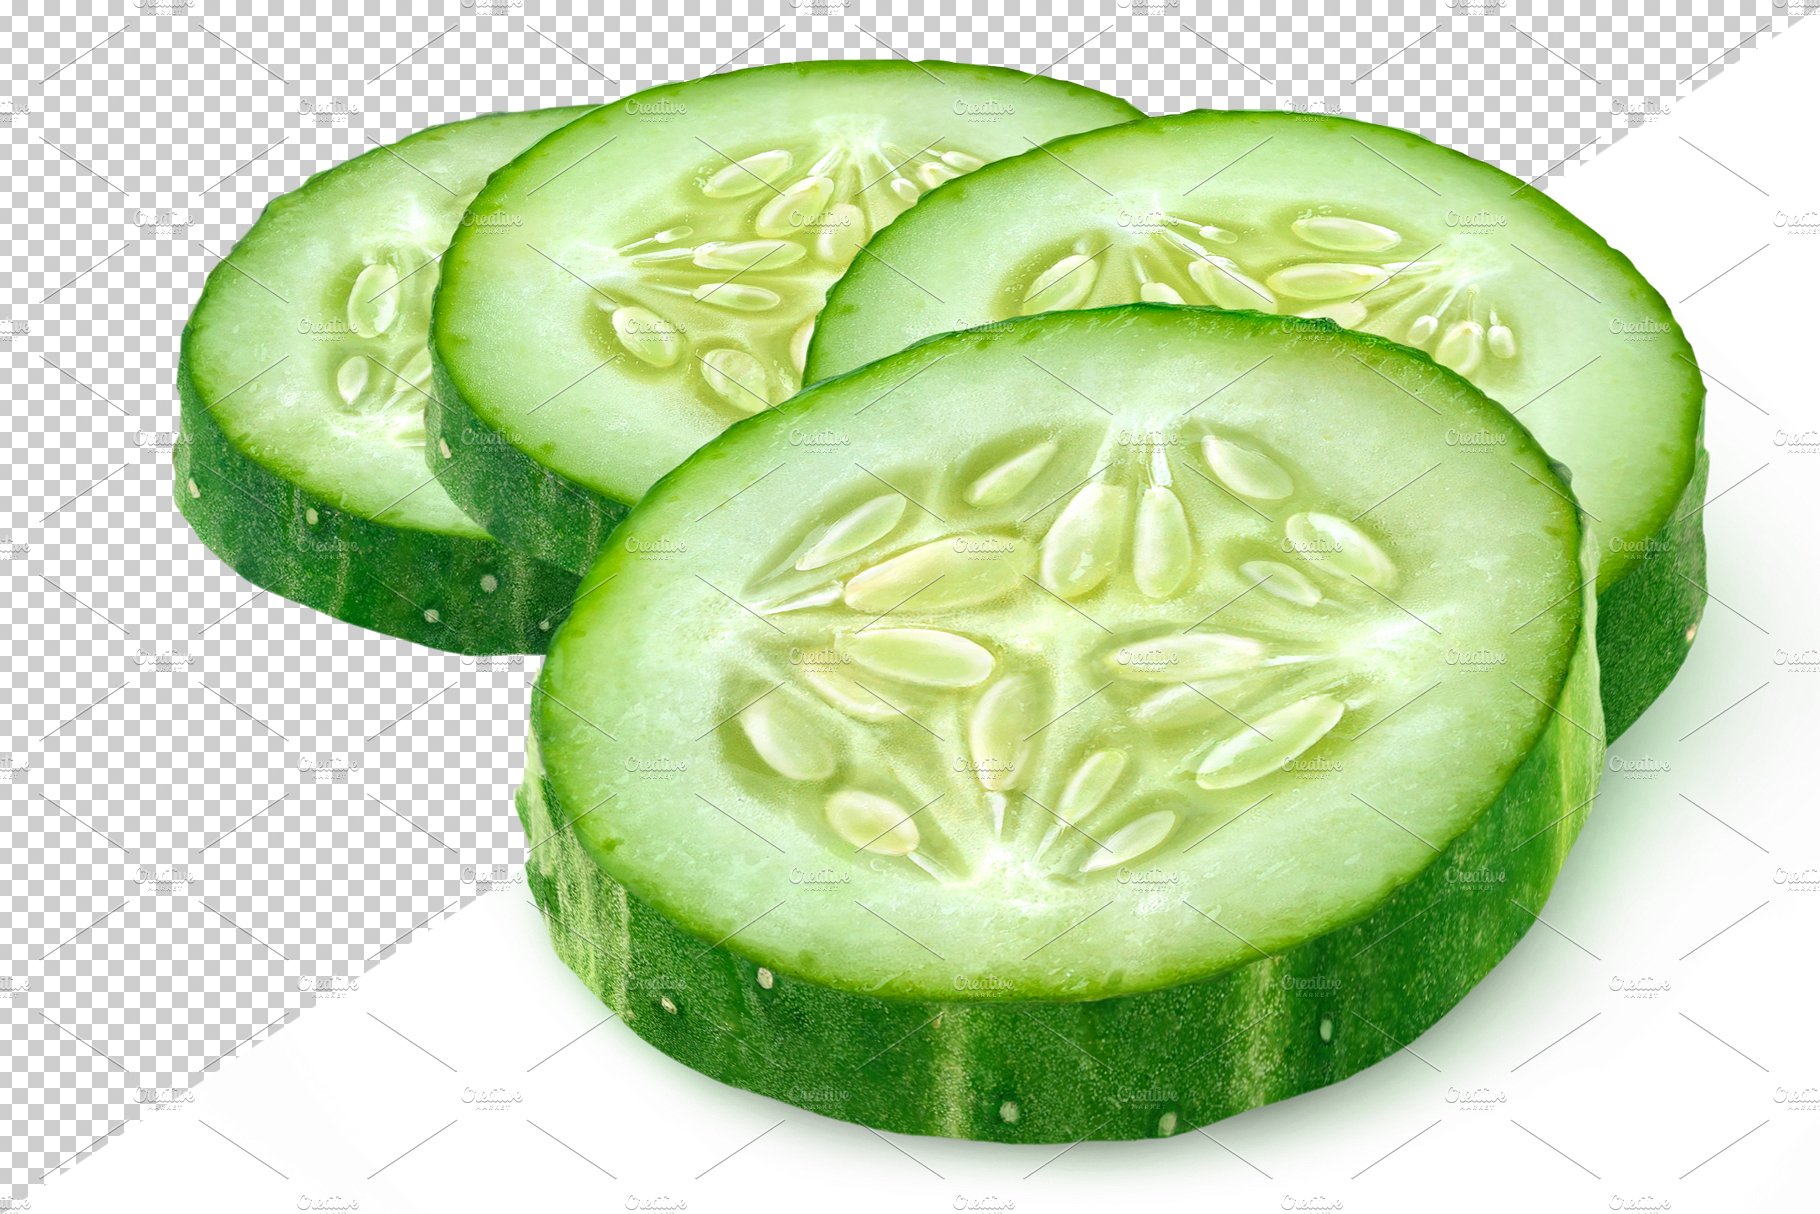 Cucumber slices preview image.